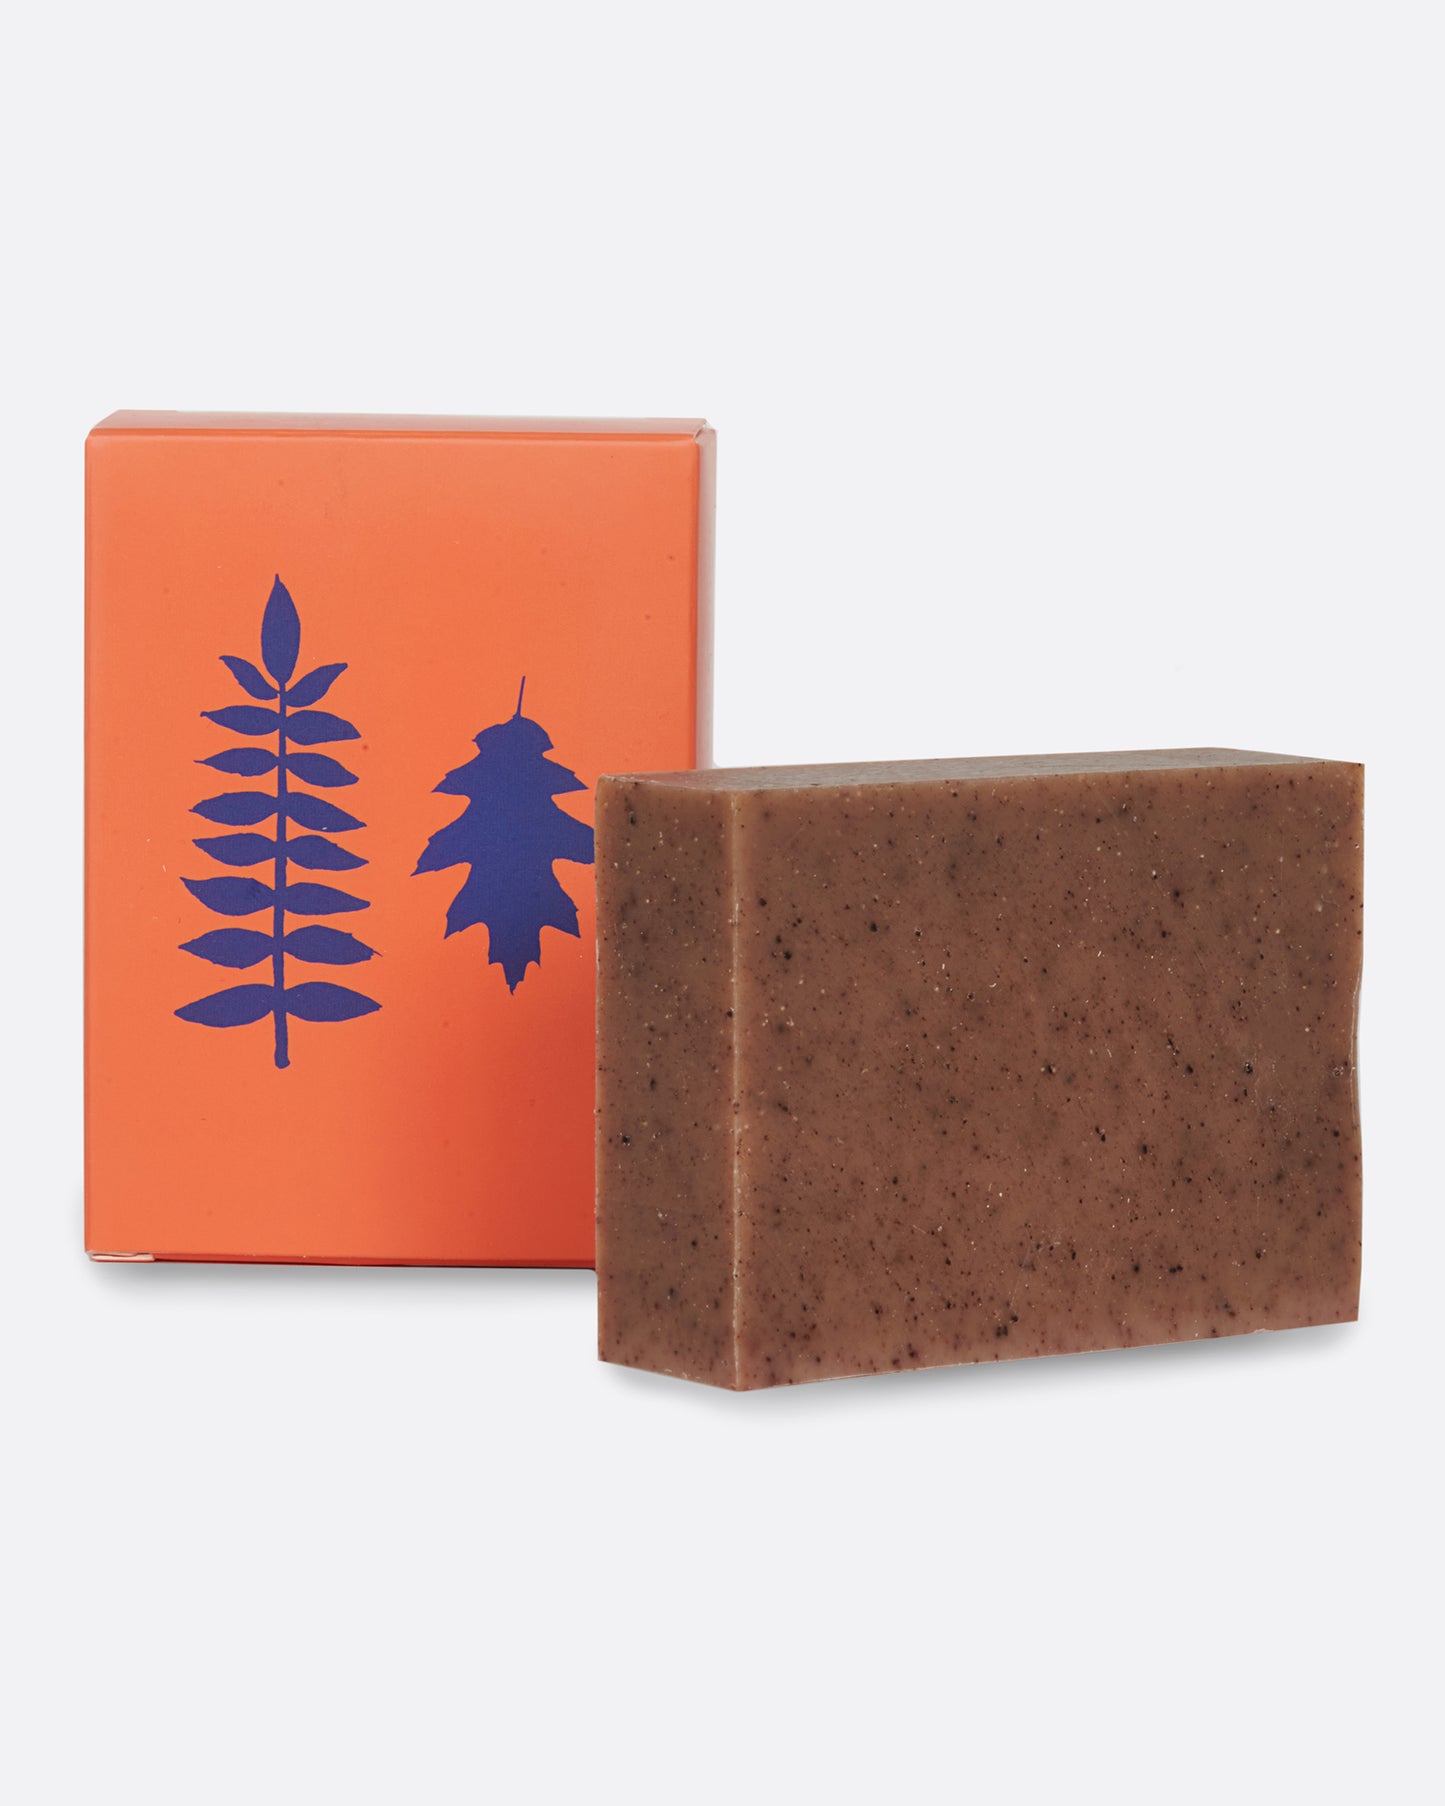 Bar soap made from ground Black Walnut husks and Red Oak bark to create a powerful, cleansing soap that is both smokey and woodsy.